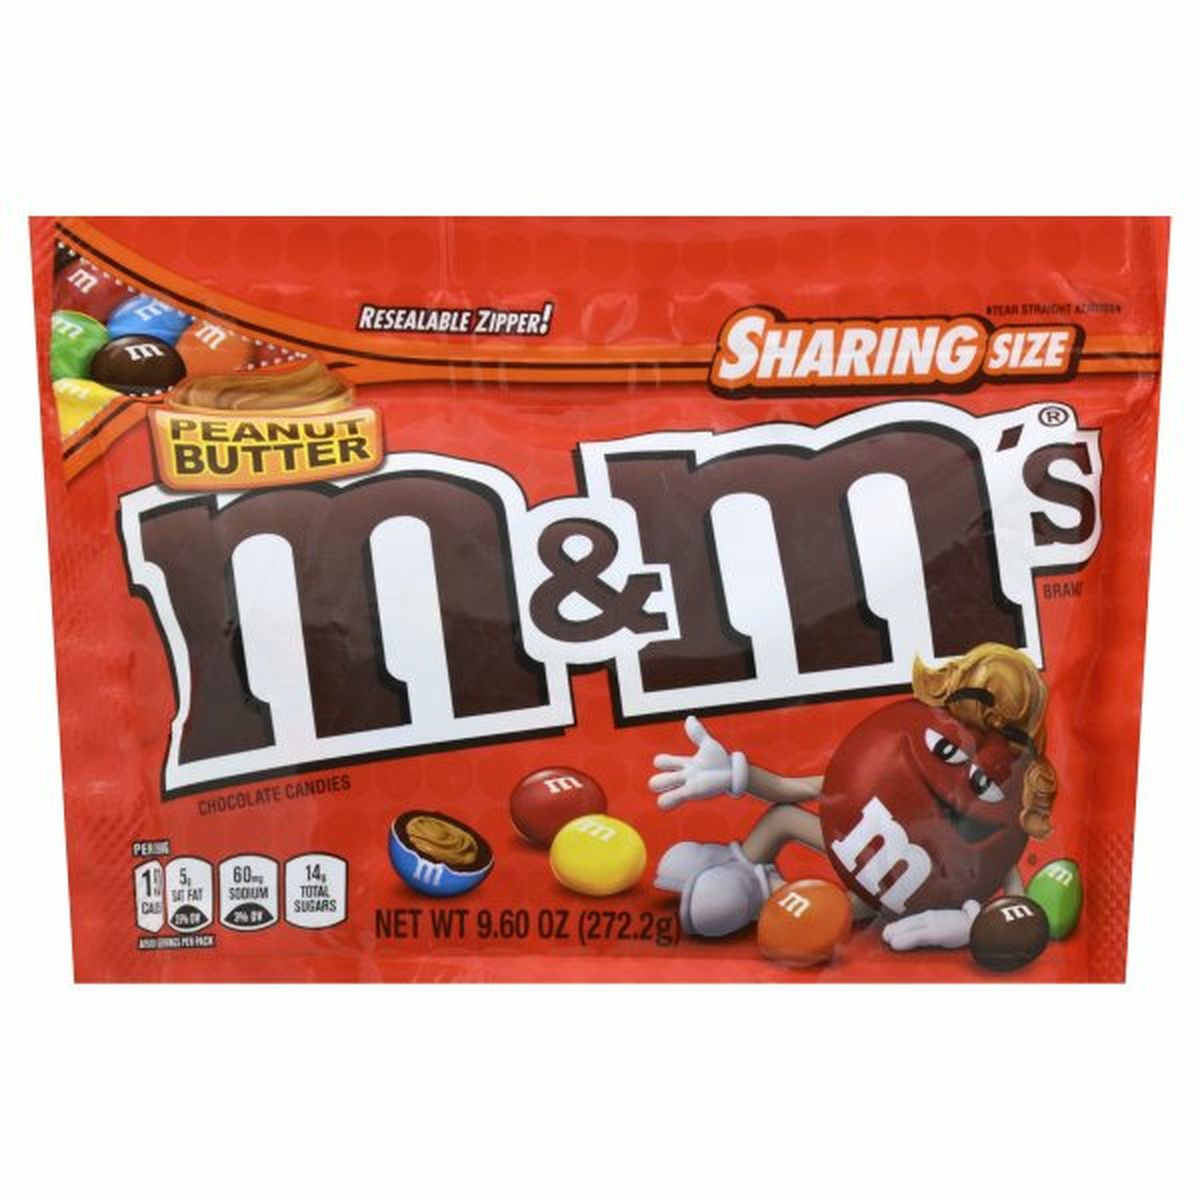 Calories in M&M's Chocolate Candies, Peanut Butter, Sharing Size